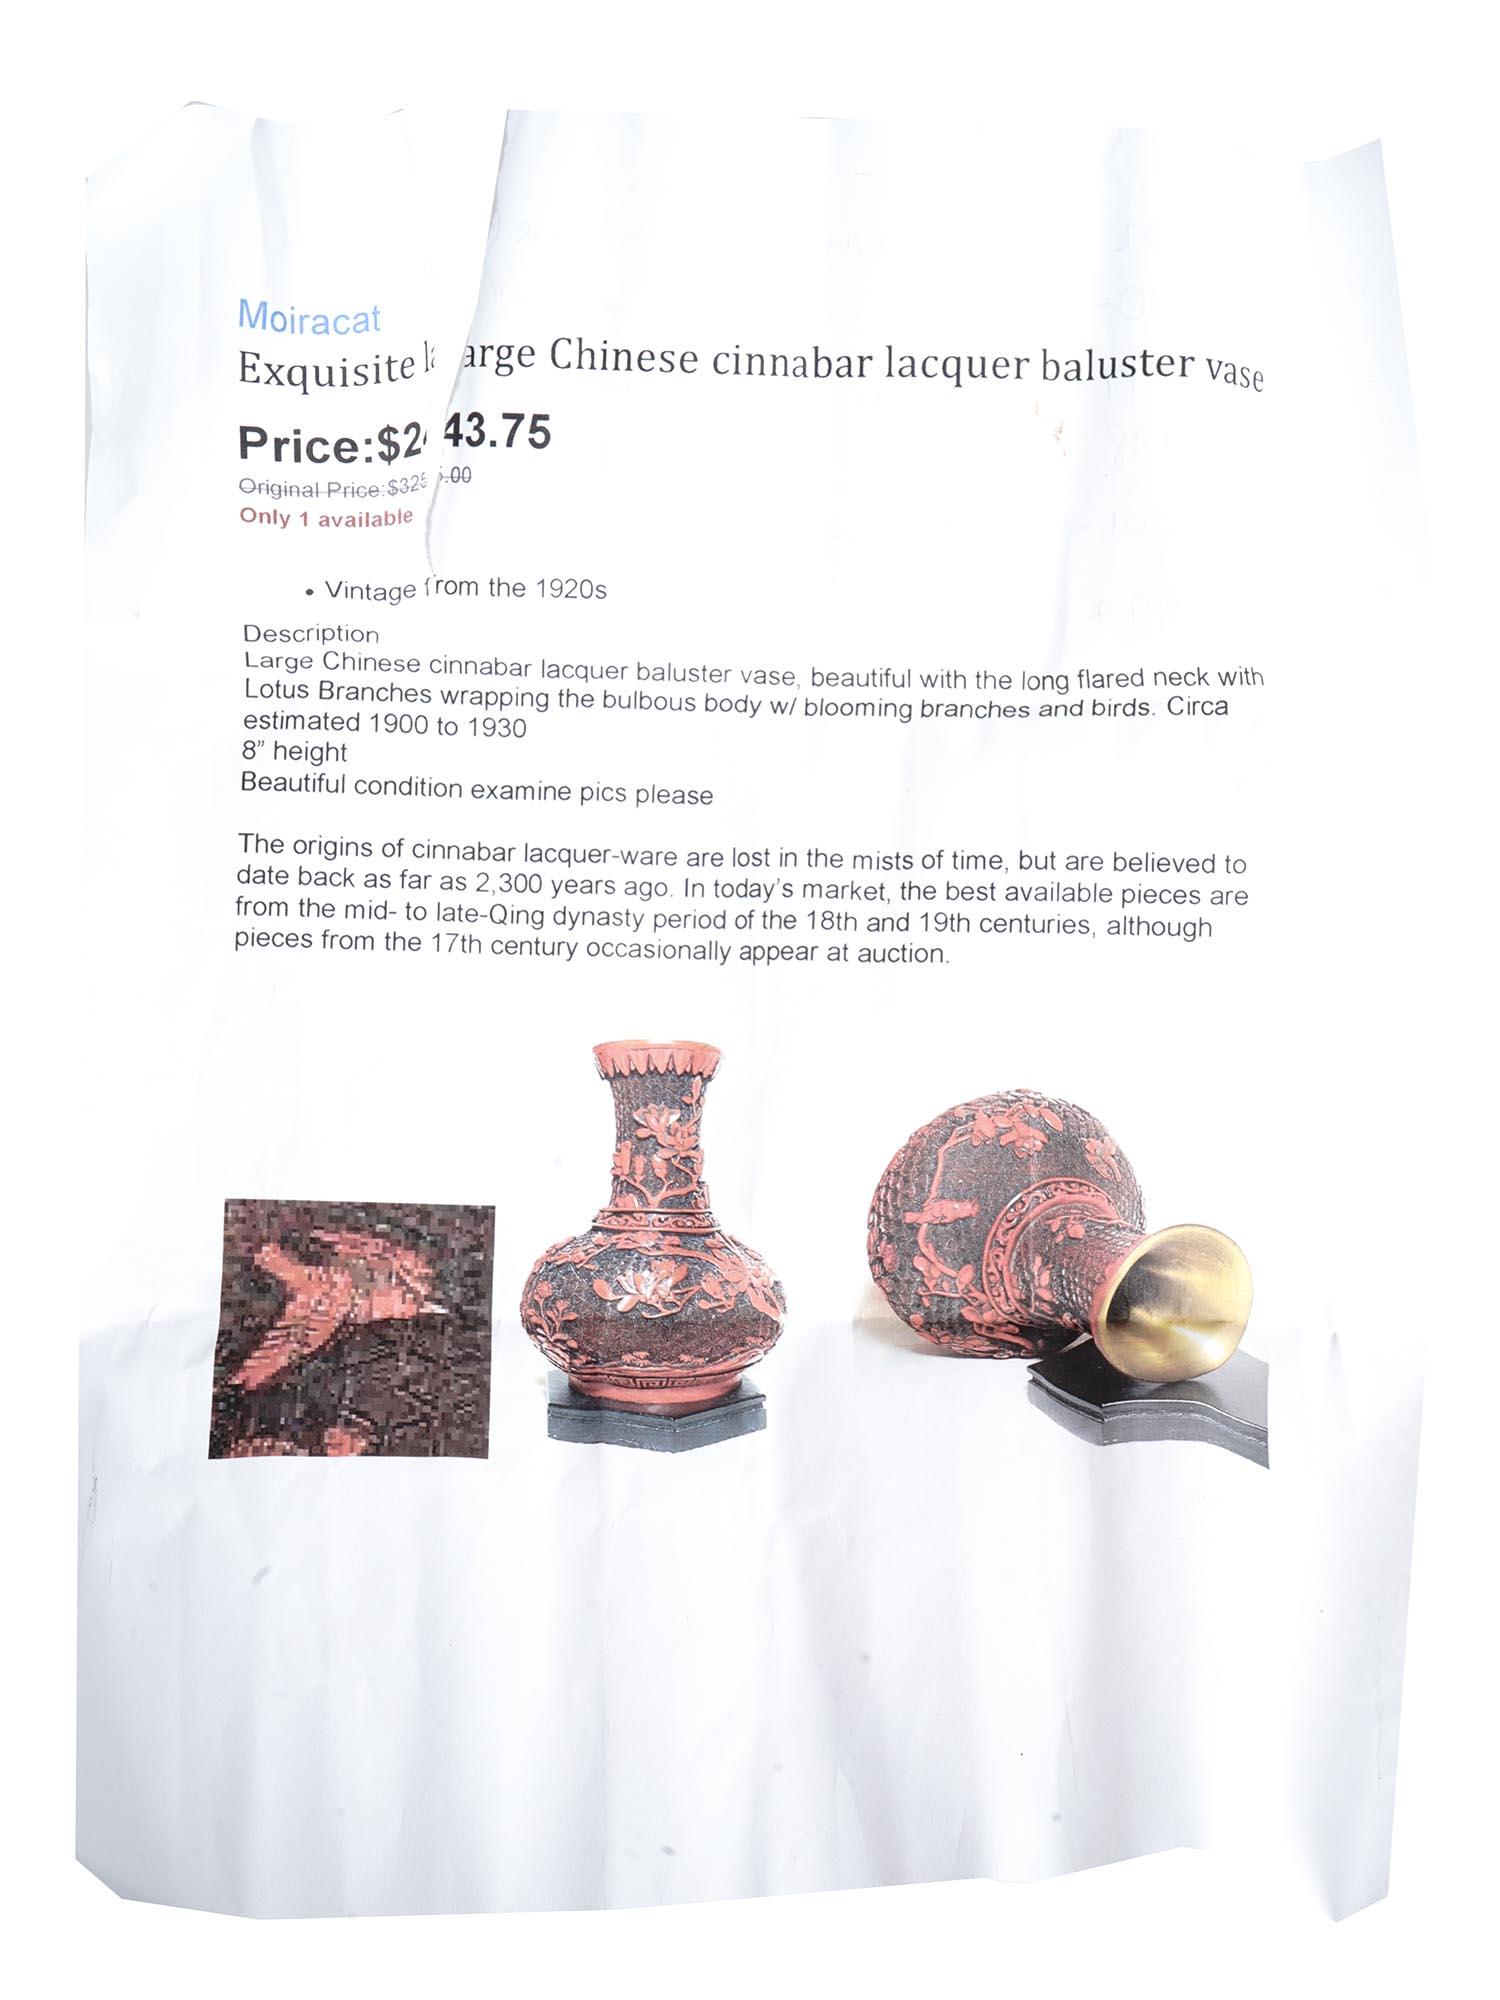 ANTIQUE CHINESE CINNABAR LACQUER BALUSTER VASE PIC-7